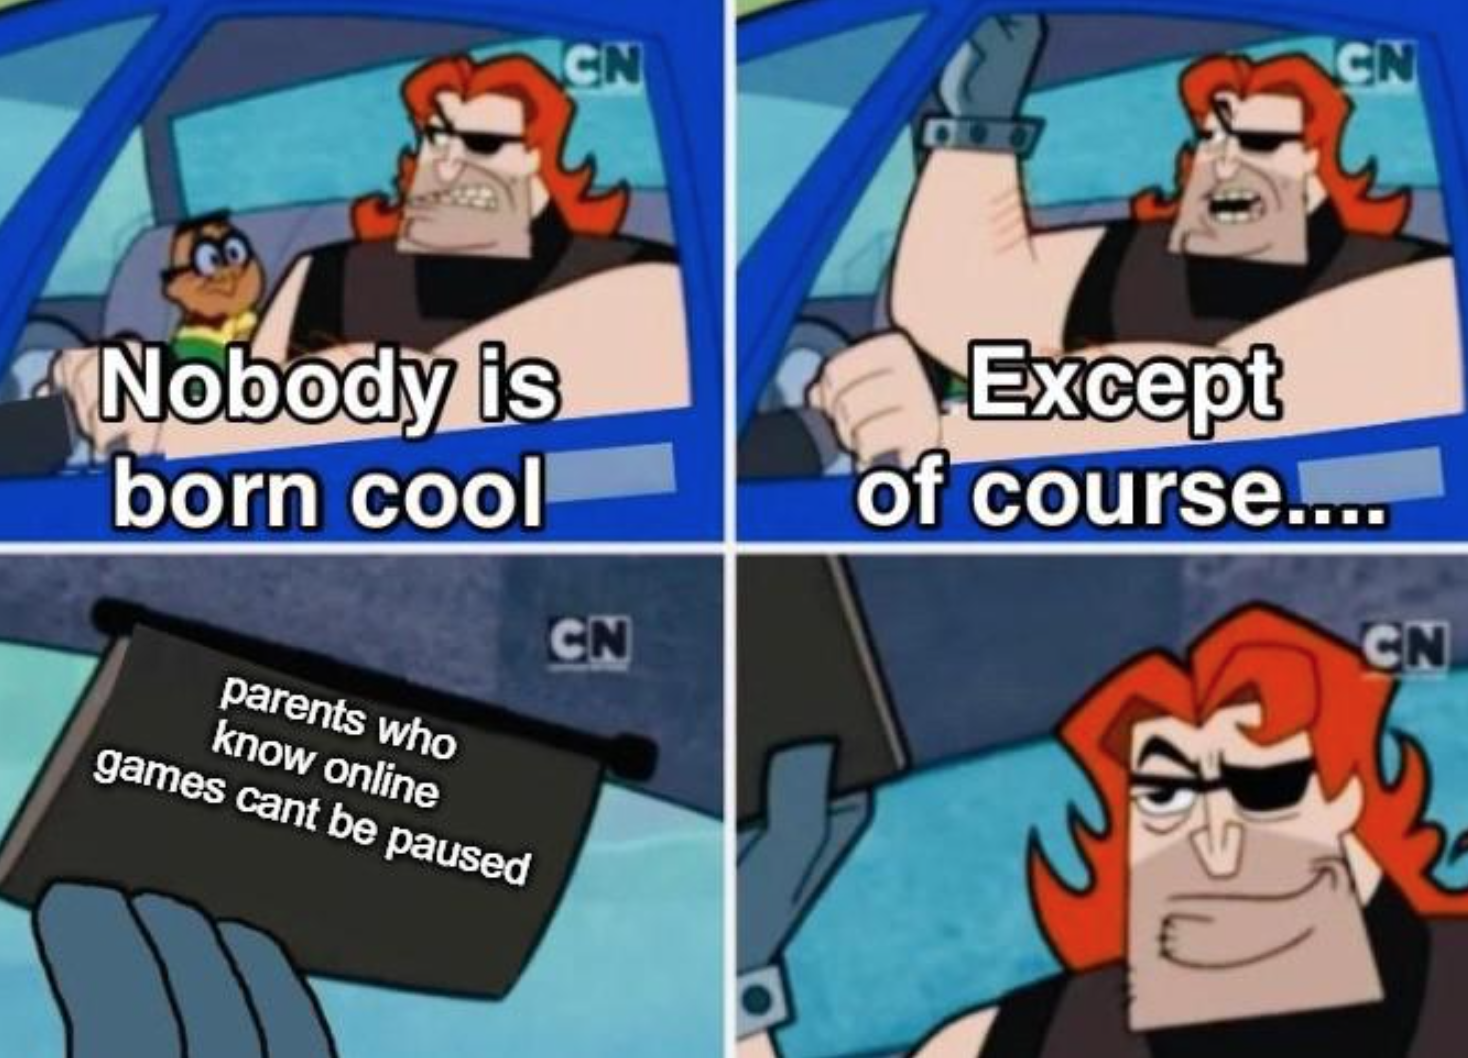 funny gaming memes - iron chancellor meme - Cn Cn Nobody is born cool Except of course.... Cn Cn parents who know online games cant be paused